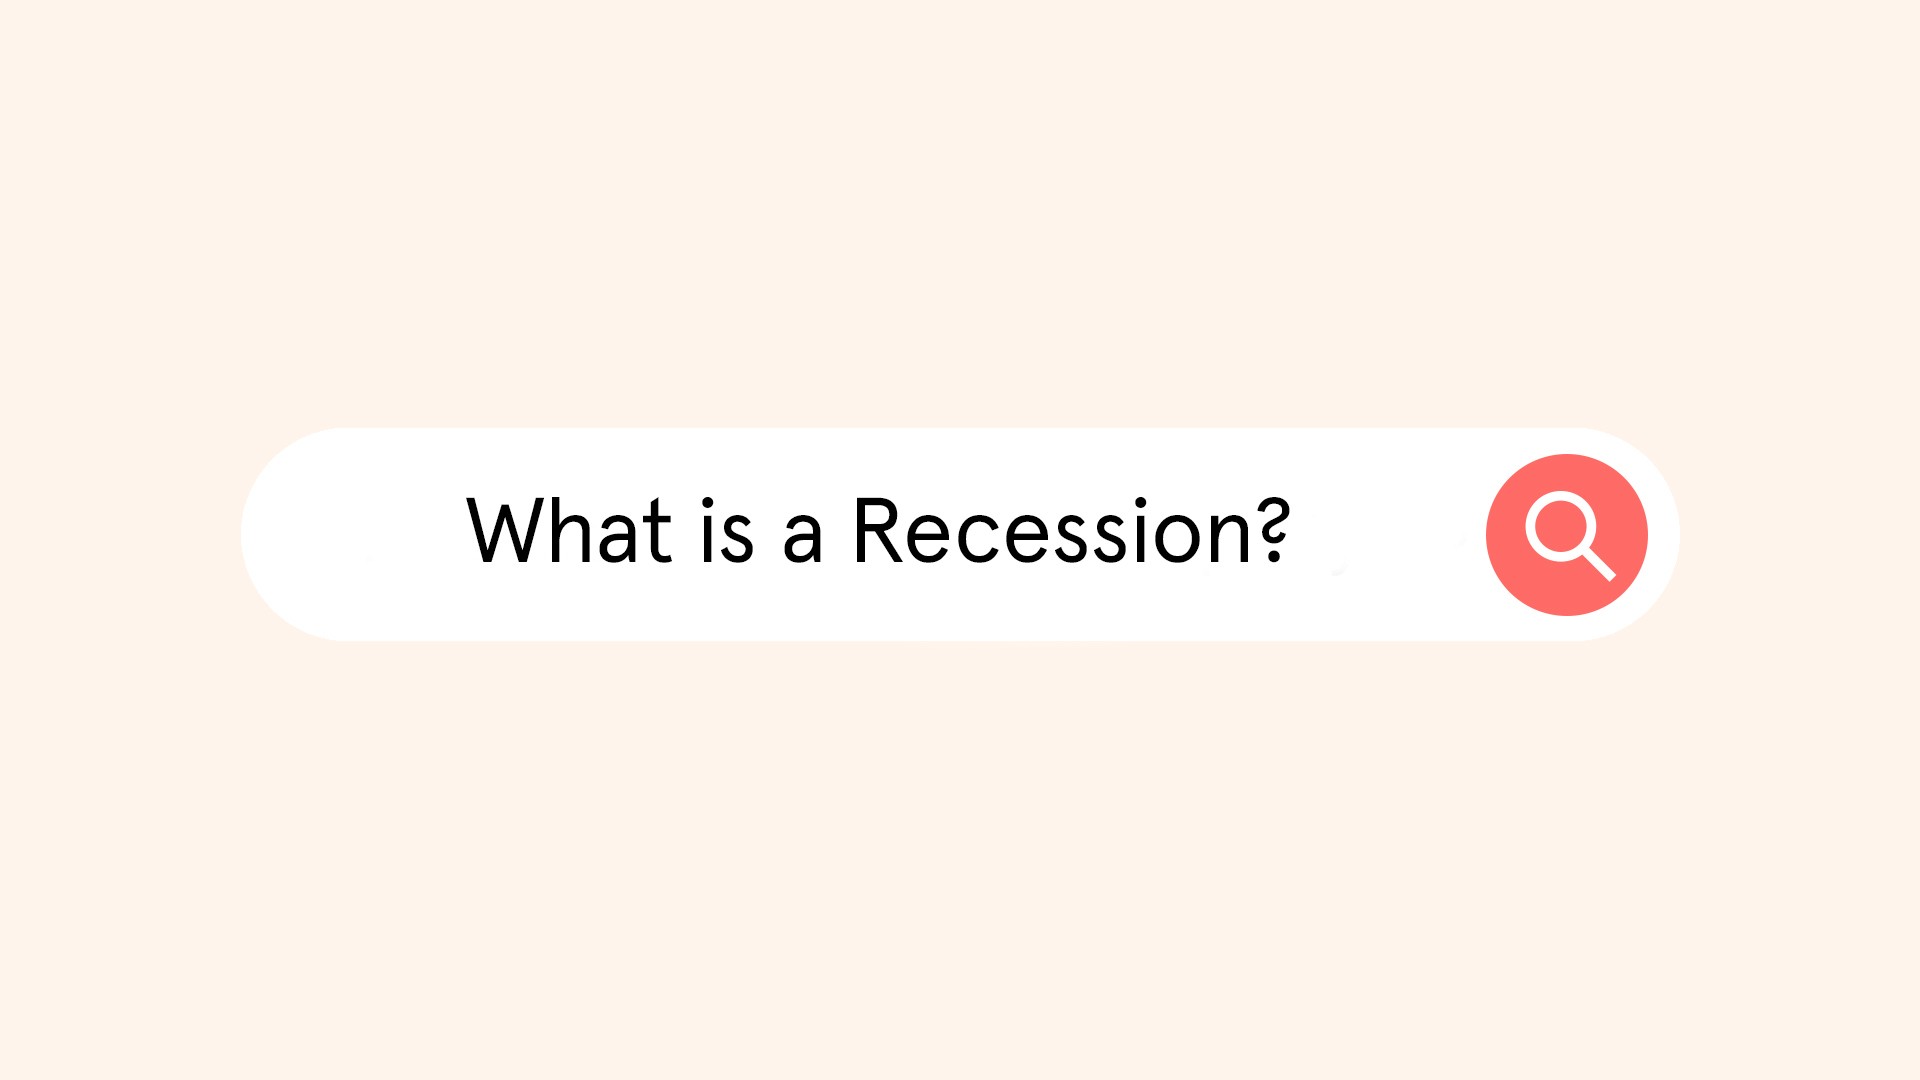 What Is a Recession?